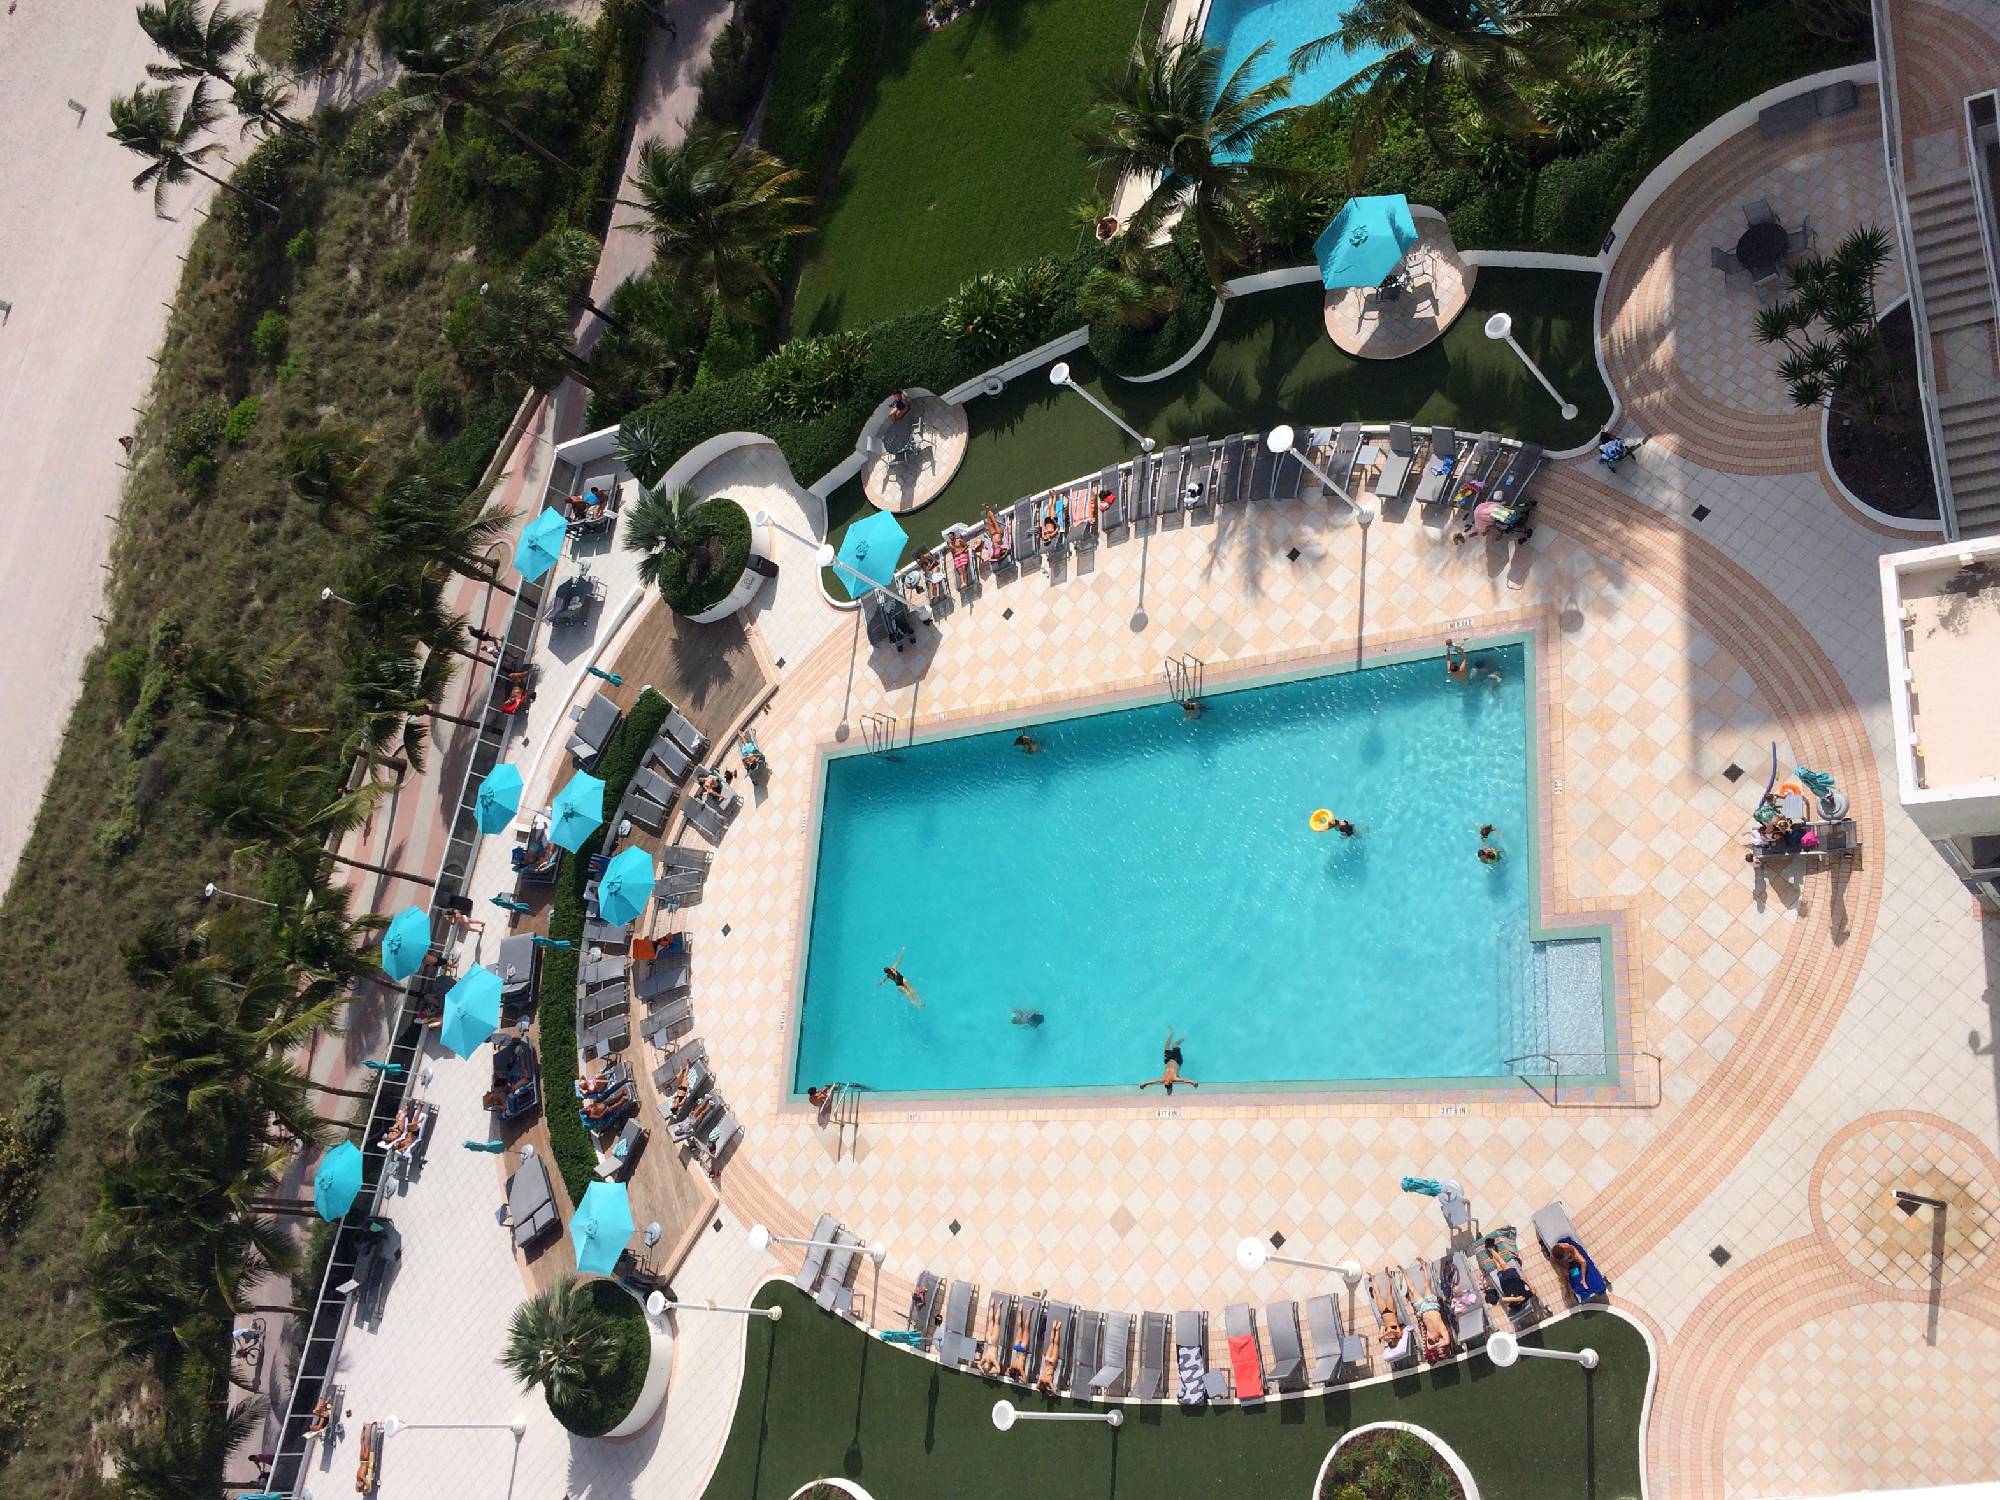 pool seen from above